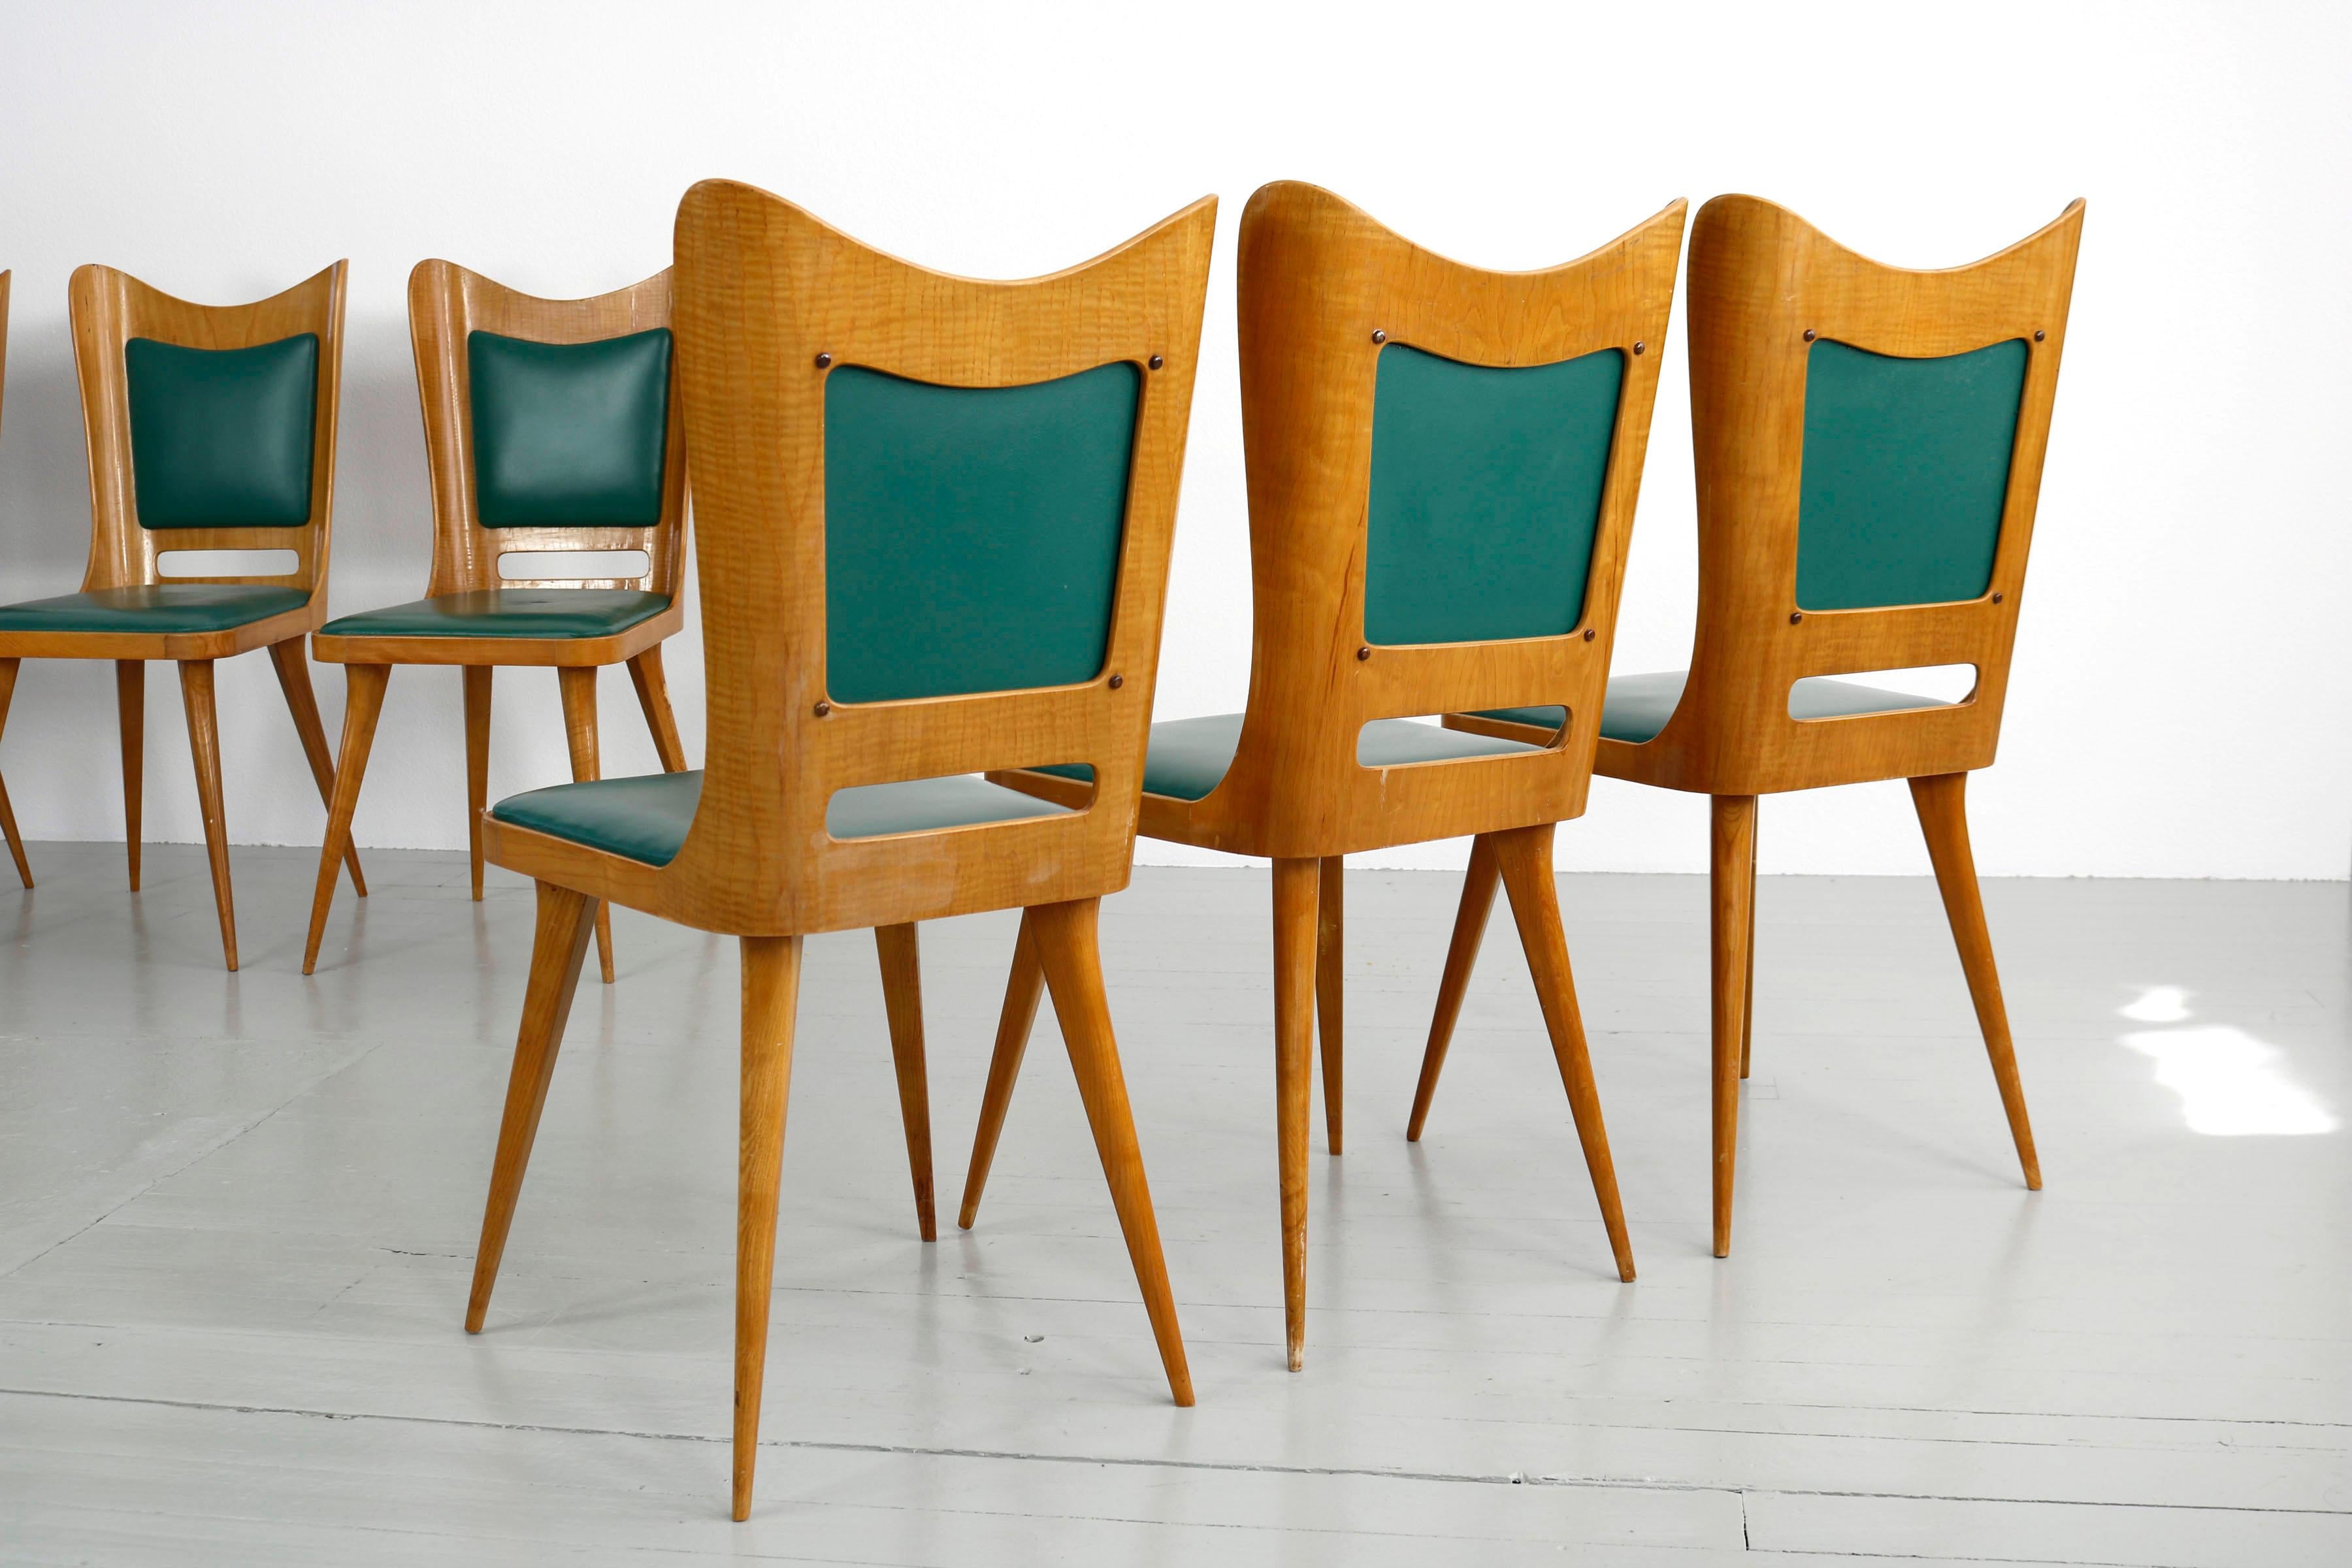 Set of Six Italian Wooden Dining Chairs with Green Upholstery, 1950 For Sale 7